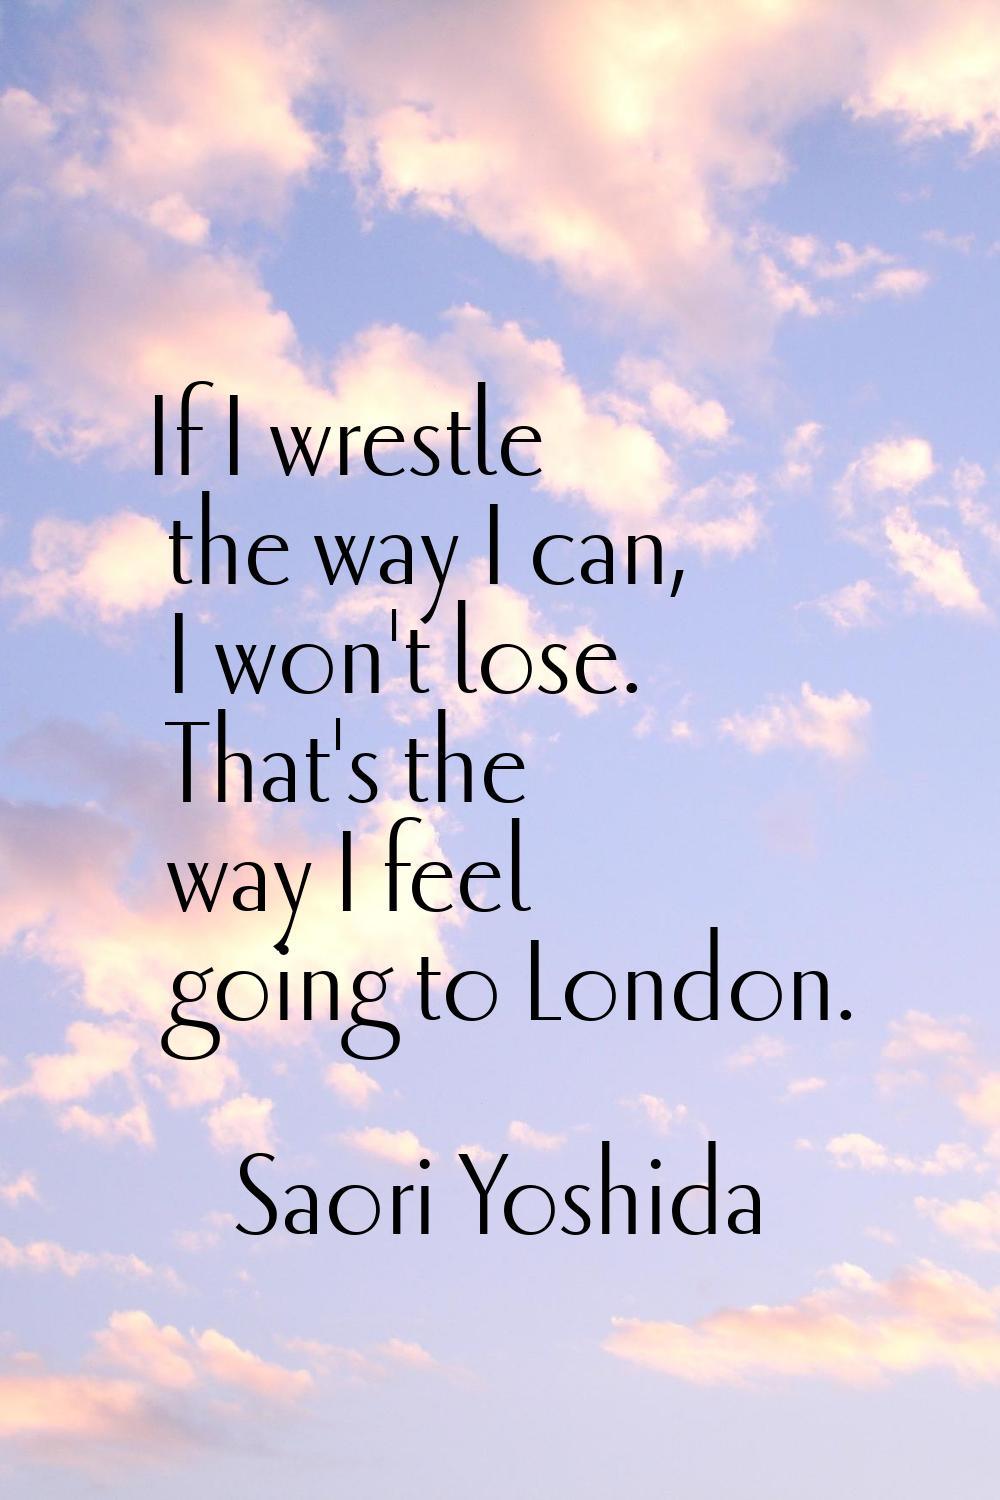 If I wrestle the way I can, I won't lose. That's the way I feel going to London.